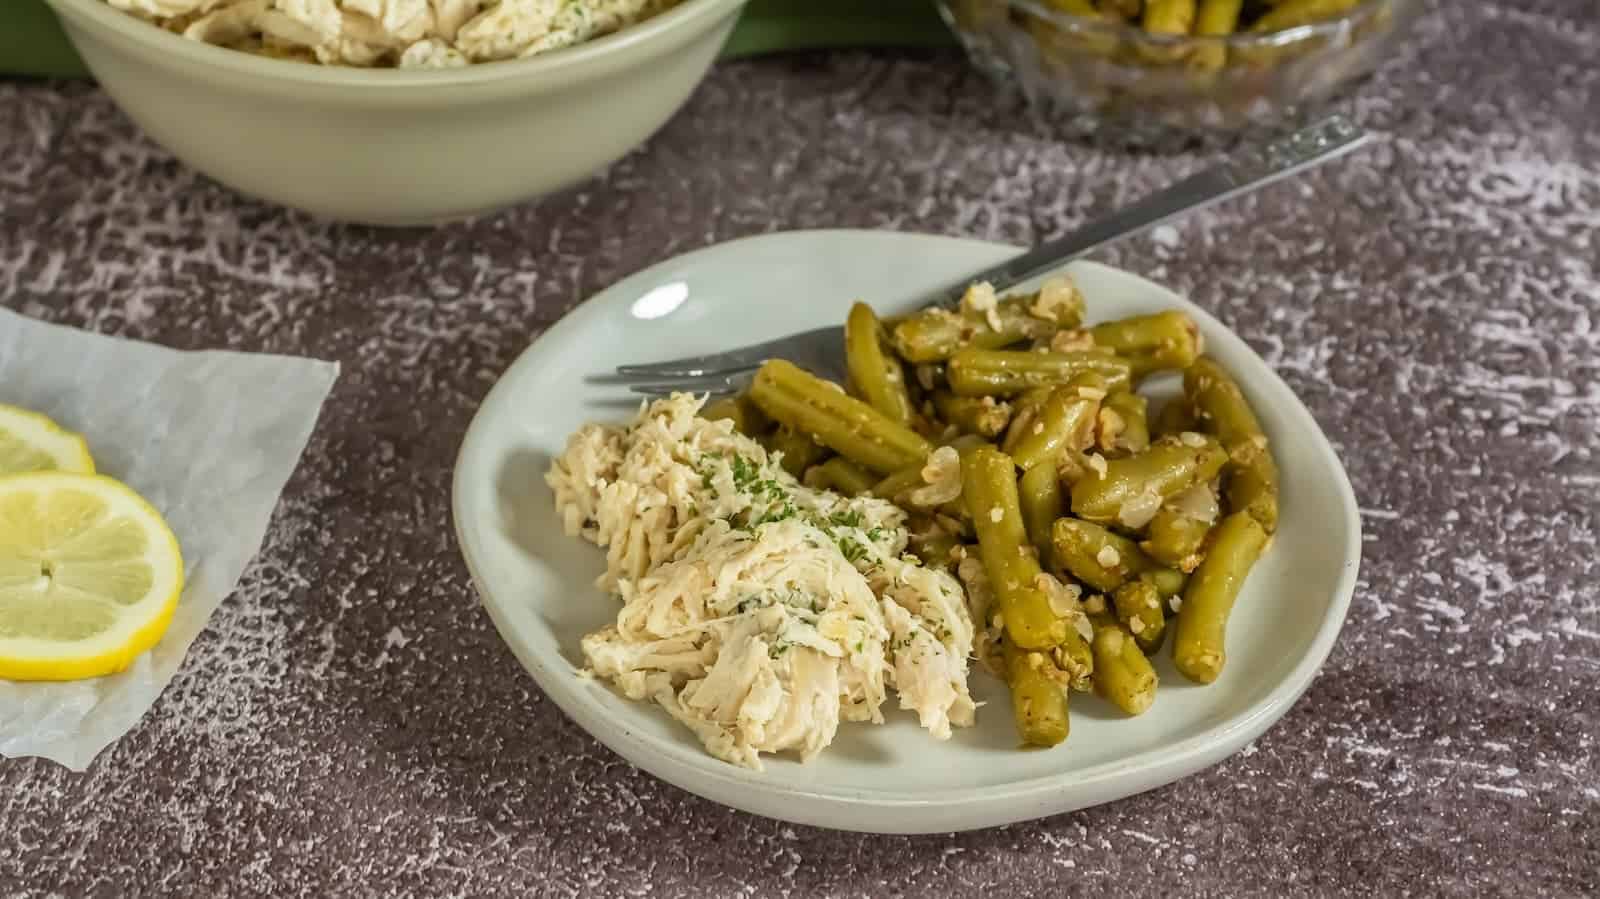 A plate of shredded chicken and green beans served with a garnish of herbs, accompanied by lemon slices and bowls of food in the background.